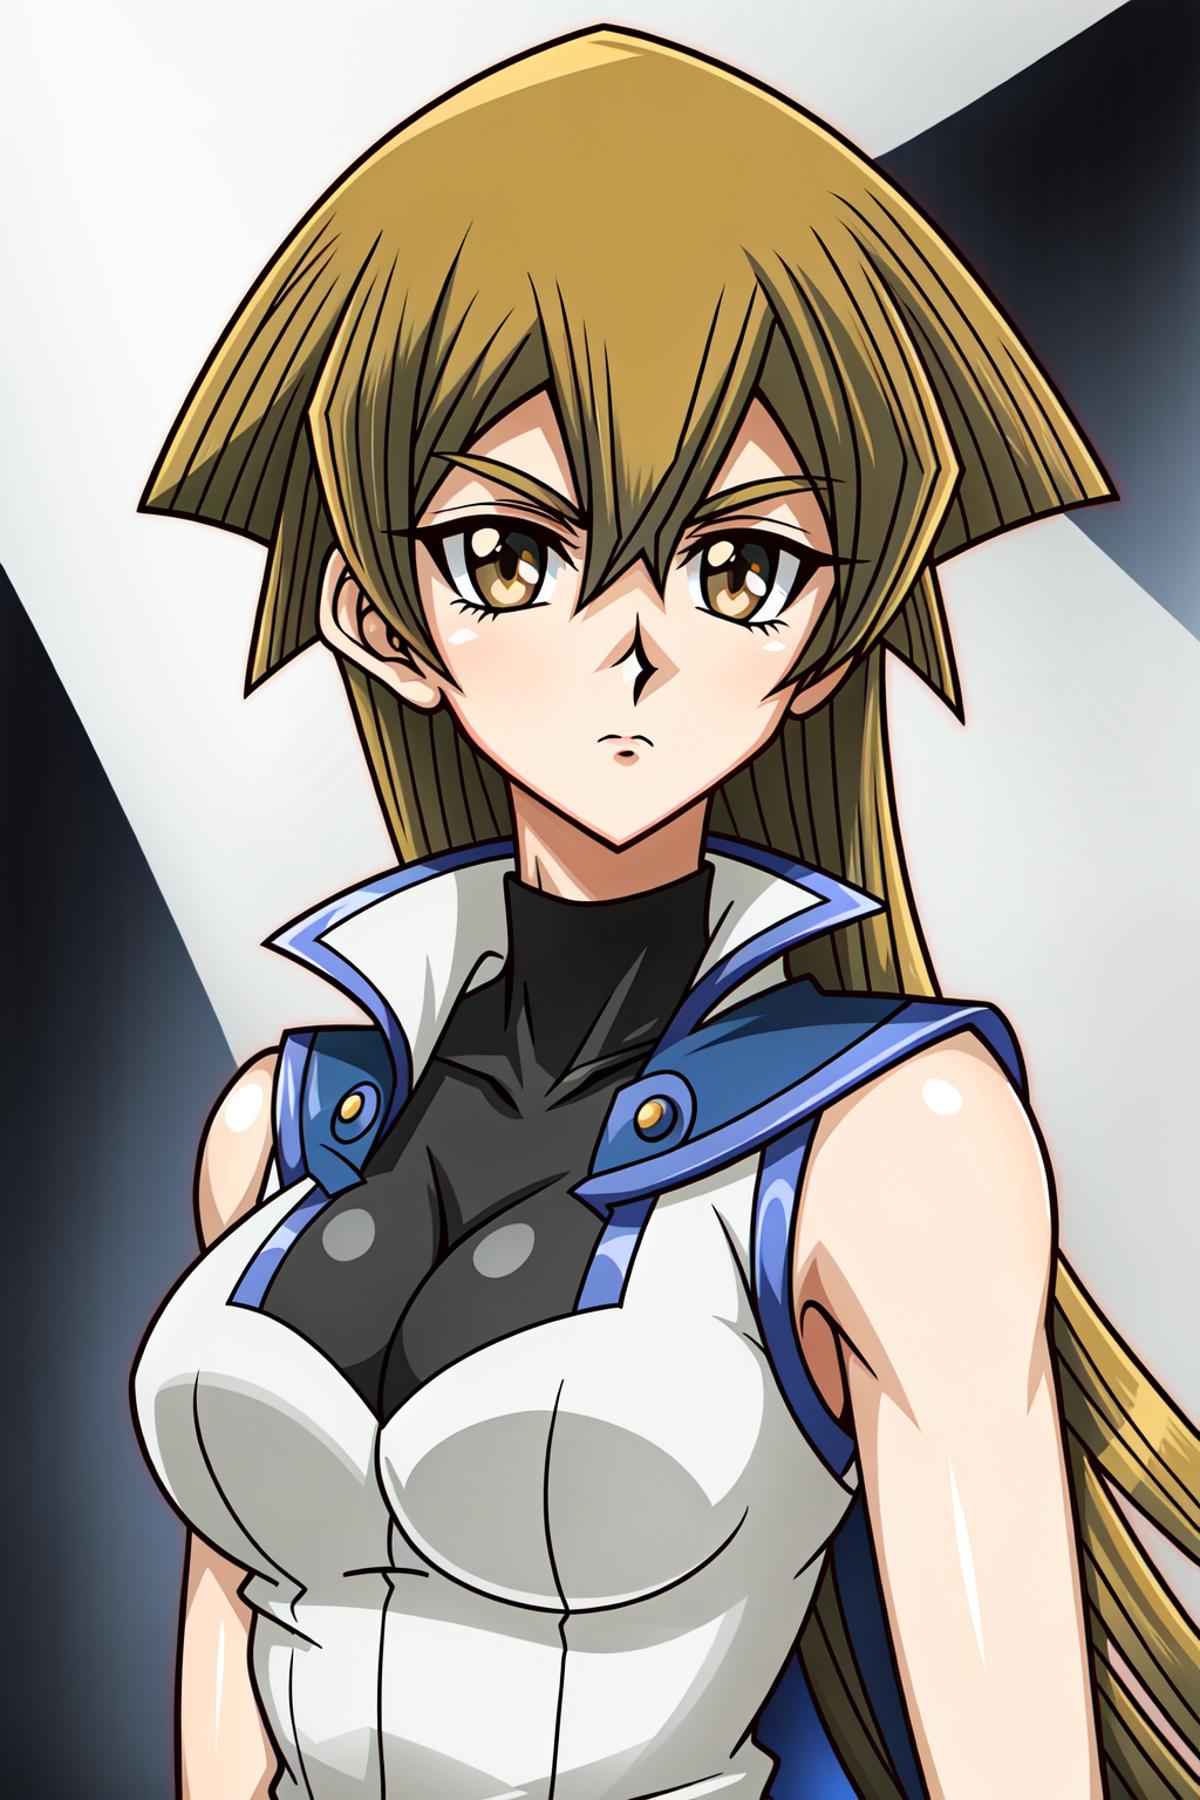 Alexis Rhodes | Yu-Gi-Oh! GX image by OG_Turles